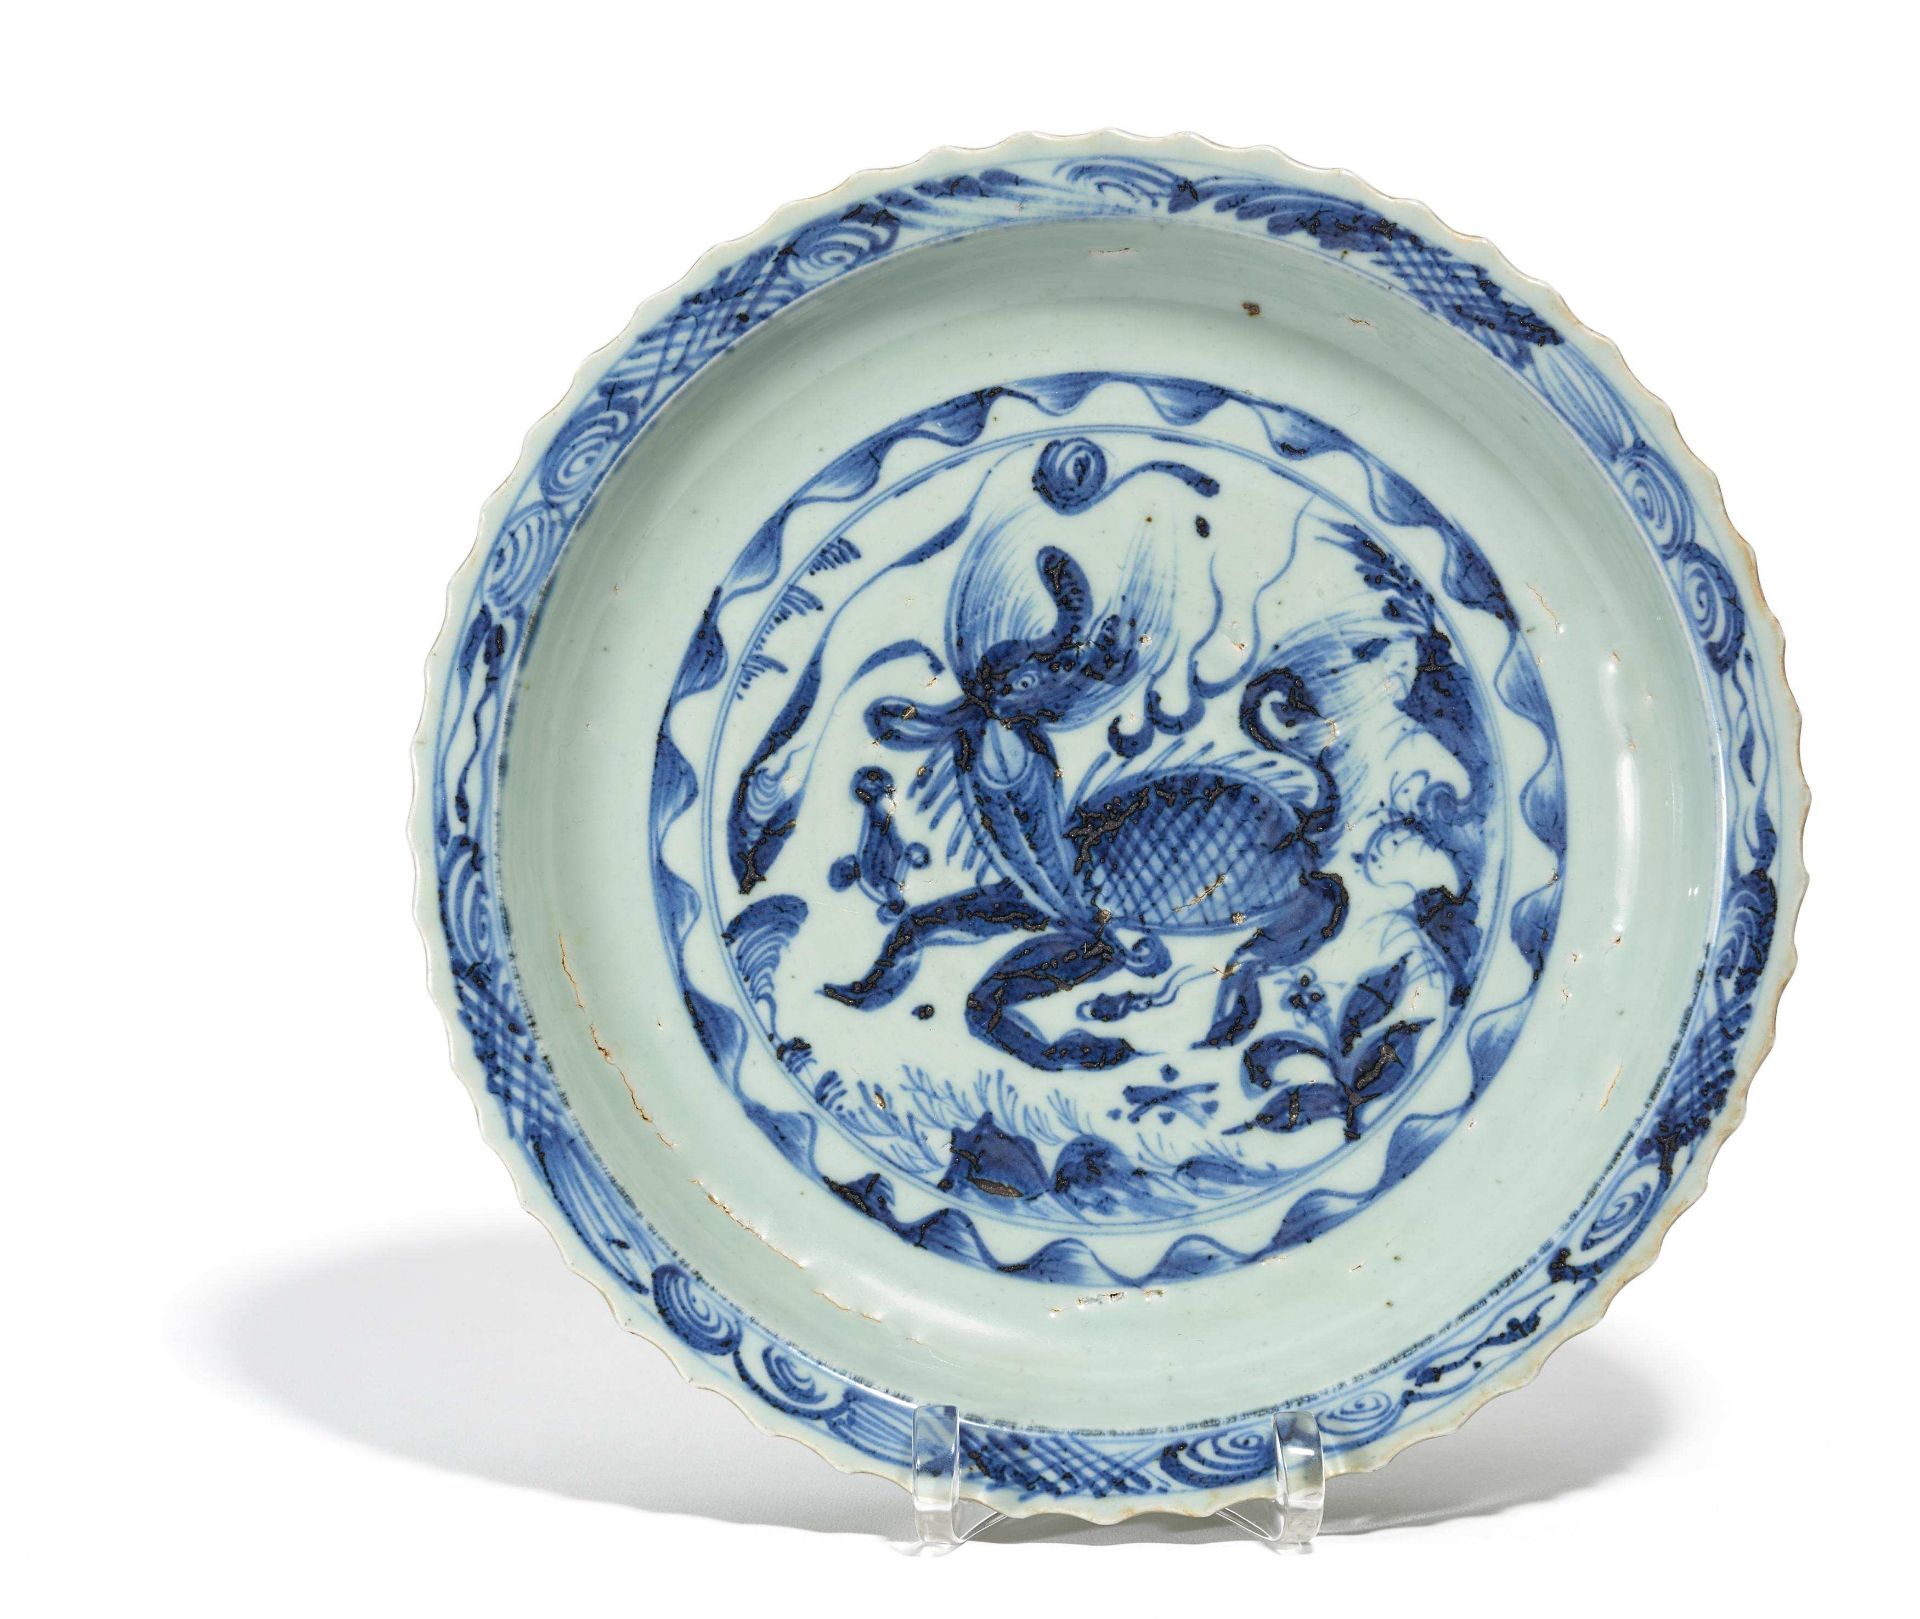 BLUE WHITE PLATE WITH A BLOSSOM-SHAPED RIM. China. Ming dynasty. 15th/16th c. Provincial style.